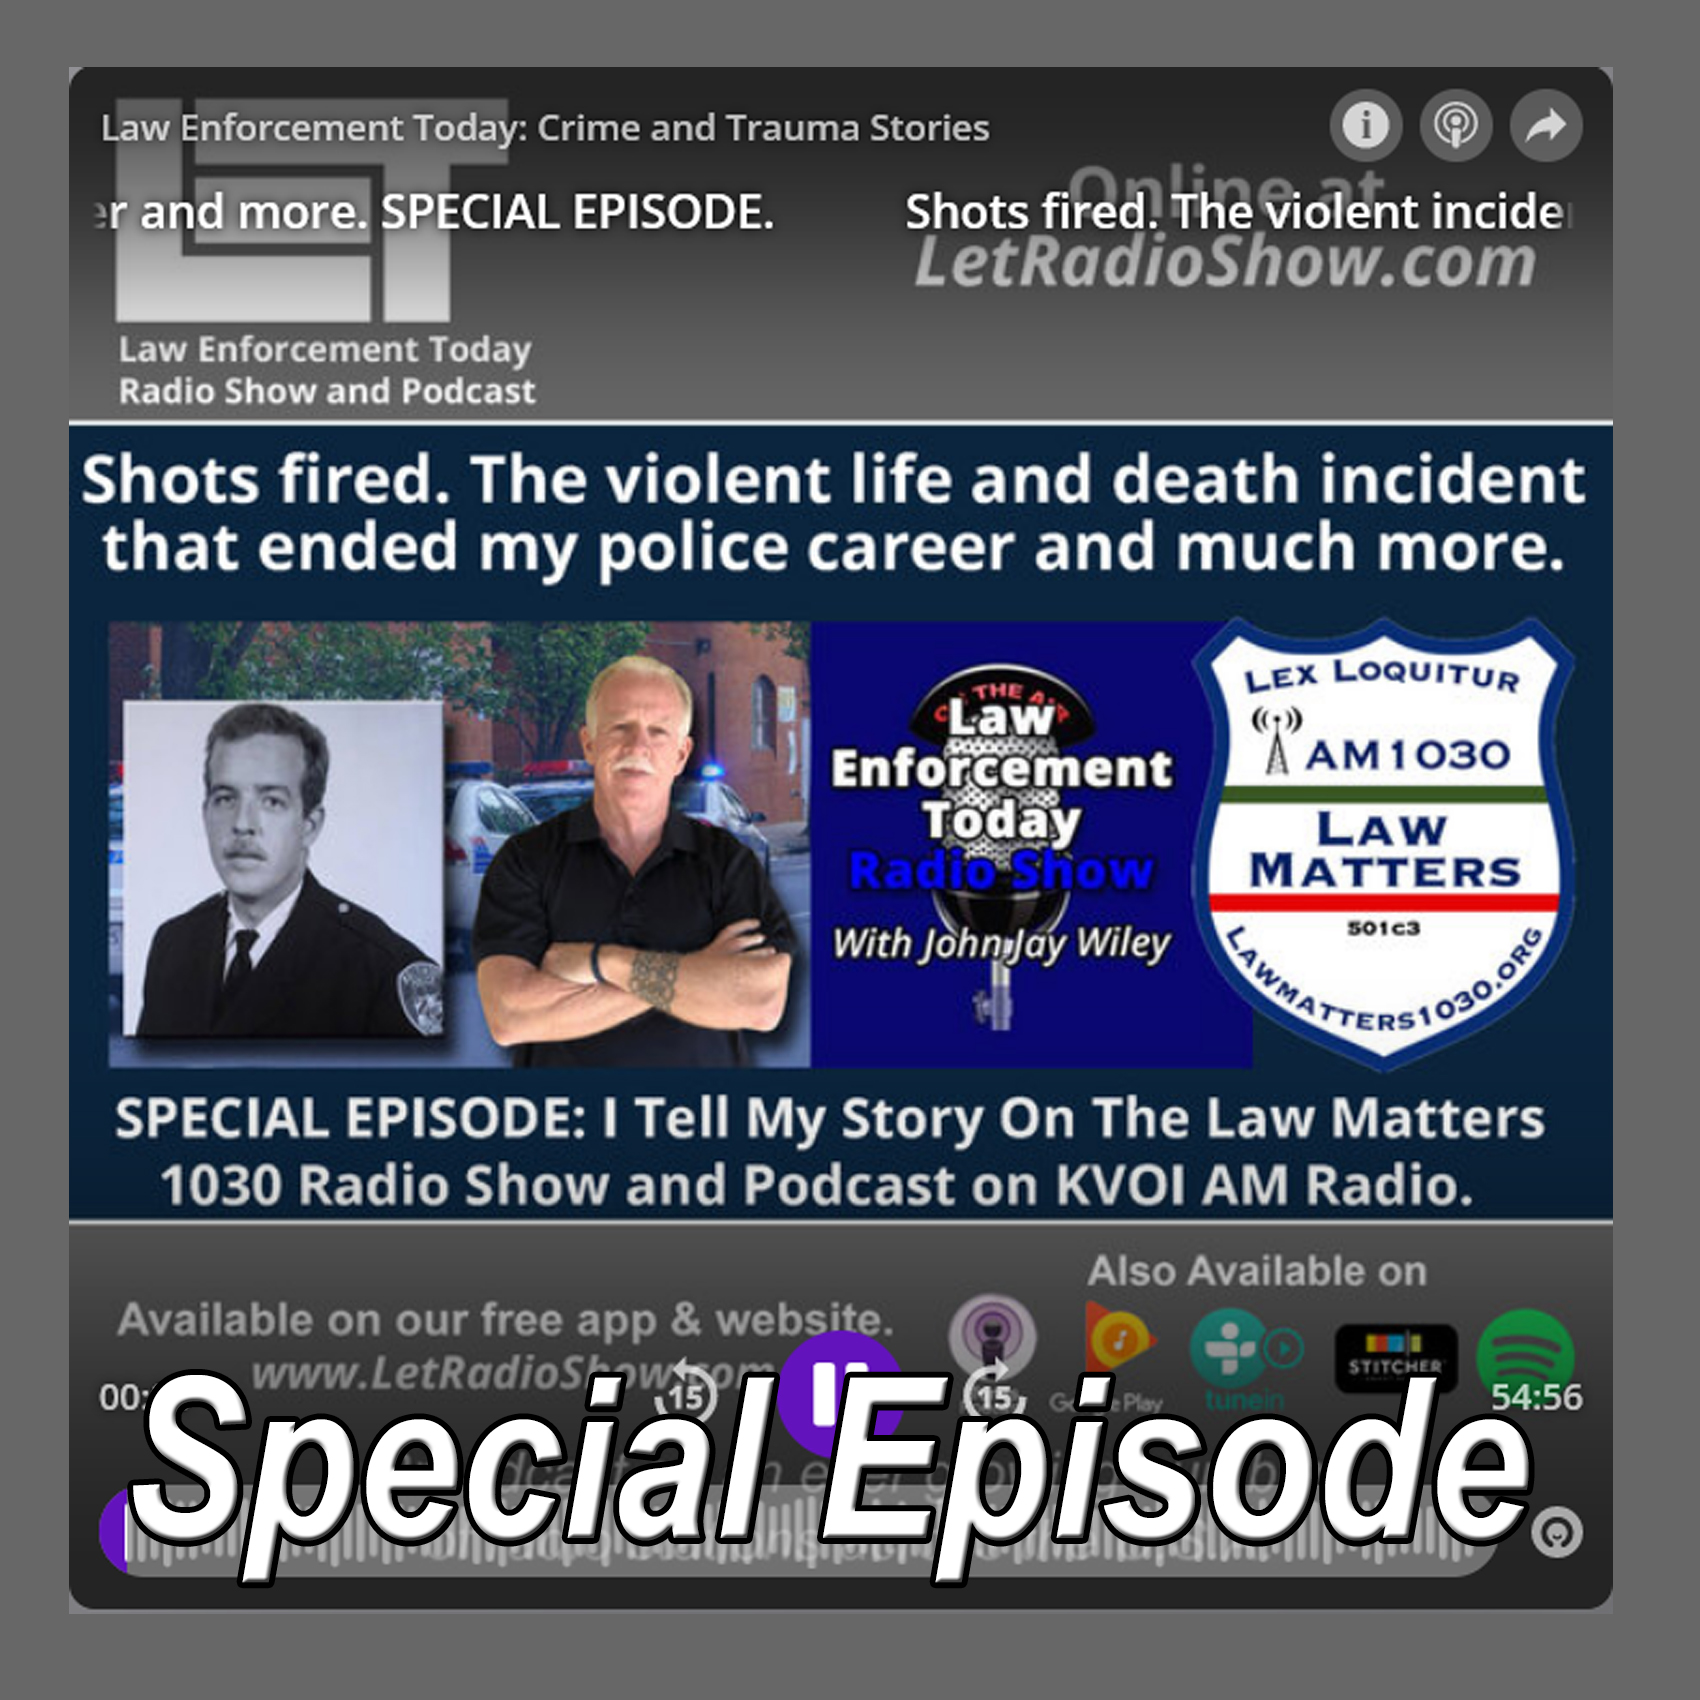 Baltimore Police Officer's Life and Death Gunfight Ended His Career. Special Episode